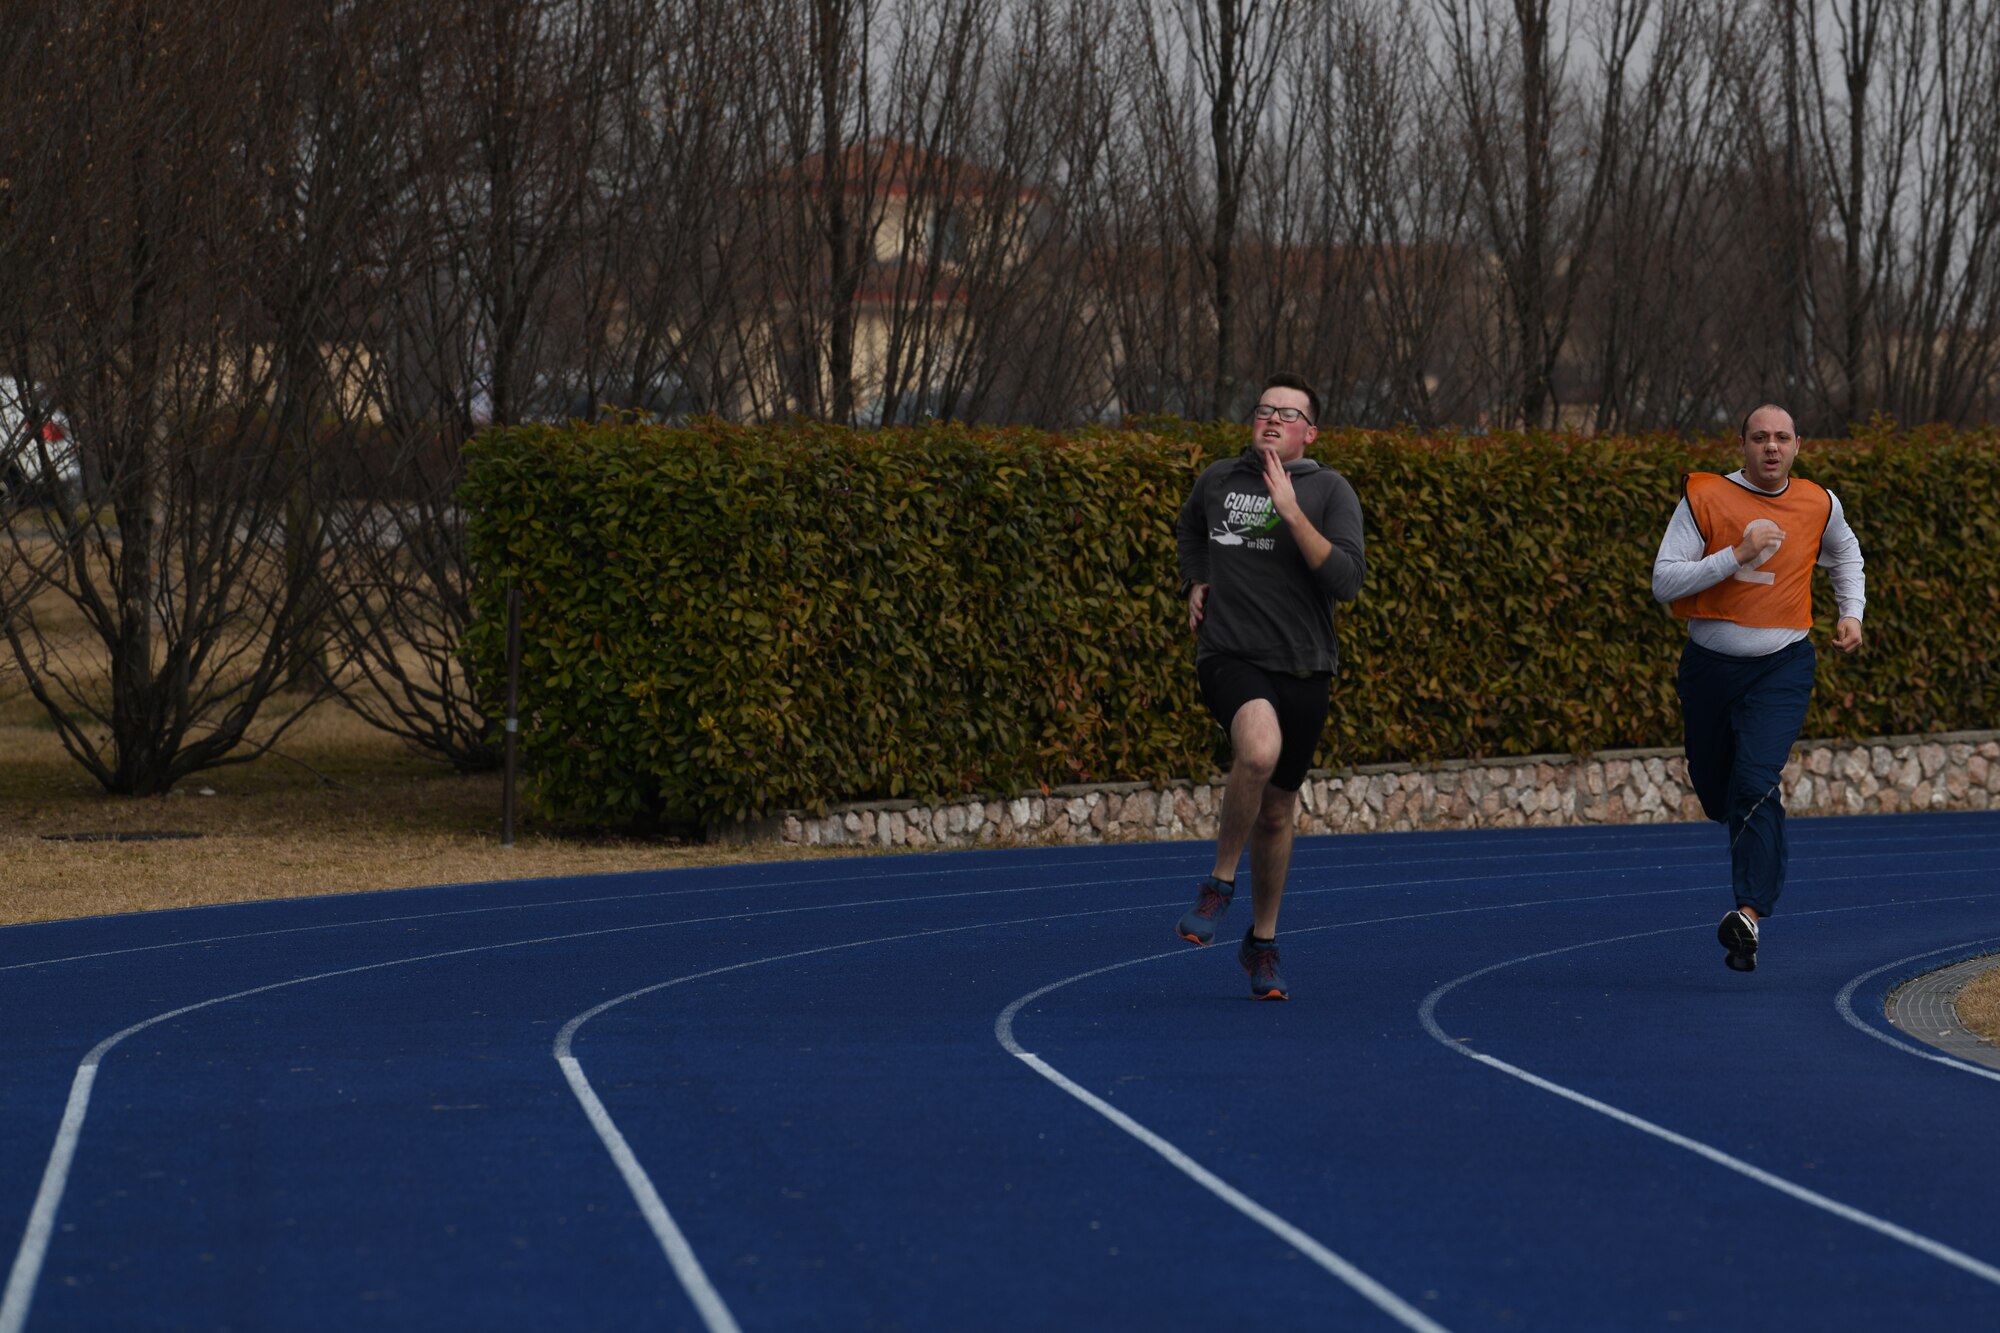 U.S. Air Force Airman 1st Class Dale Riehl, 31st Aircraft Maintenance Squadron, 56th Helicopter Maintenance Unit, sprints with an Airman during his physical fitness assessment at Aviano Air Base, Italy, Jan. 27, 2019. Riehl is a physical training leader and makes it his goal to motivate any Airmen that he can during their physical fitness assessment. (U.S. Air Force photo by Airman 1st Class Ericka A. Woolever)